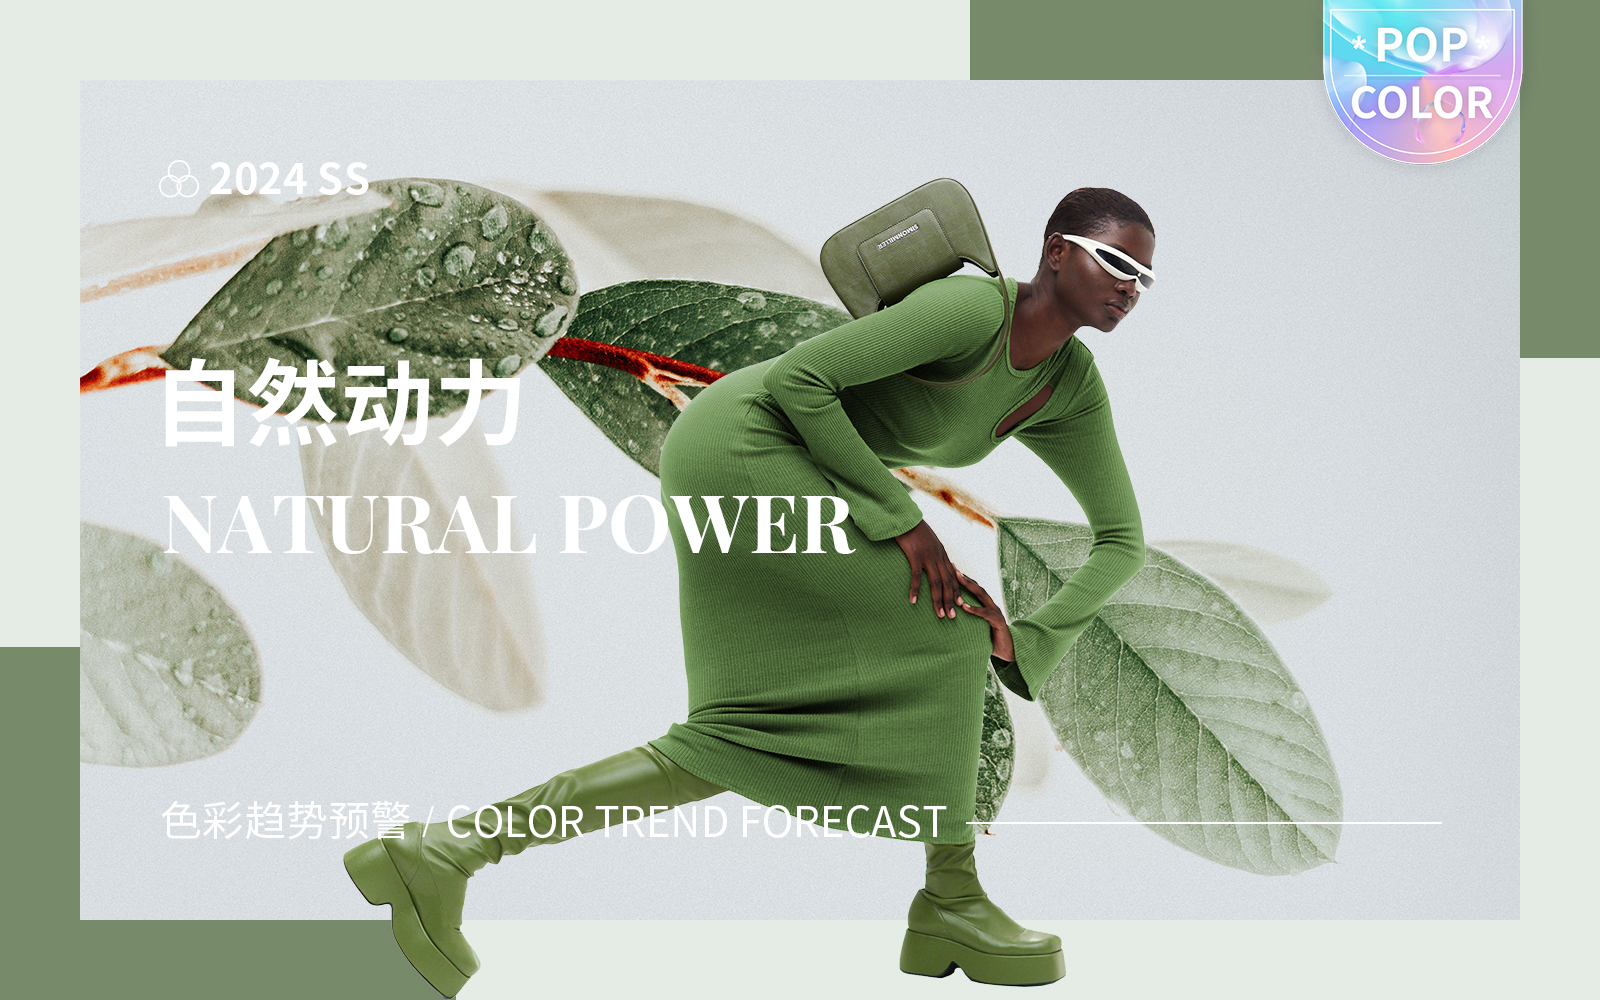 Natural Power -- The S/S 2024 Color Trend Forecast of Women's Knitwear